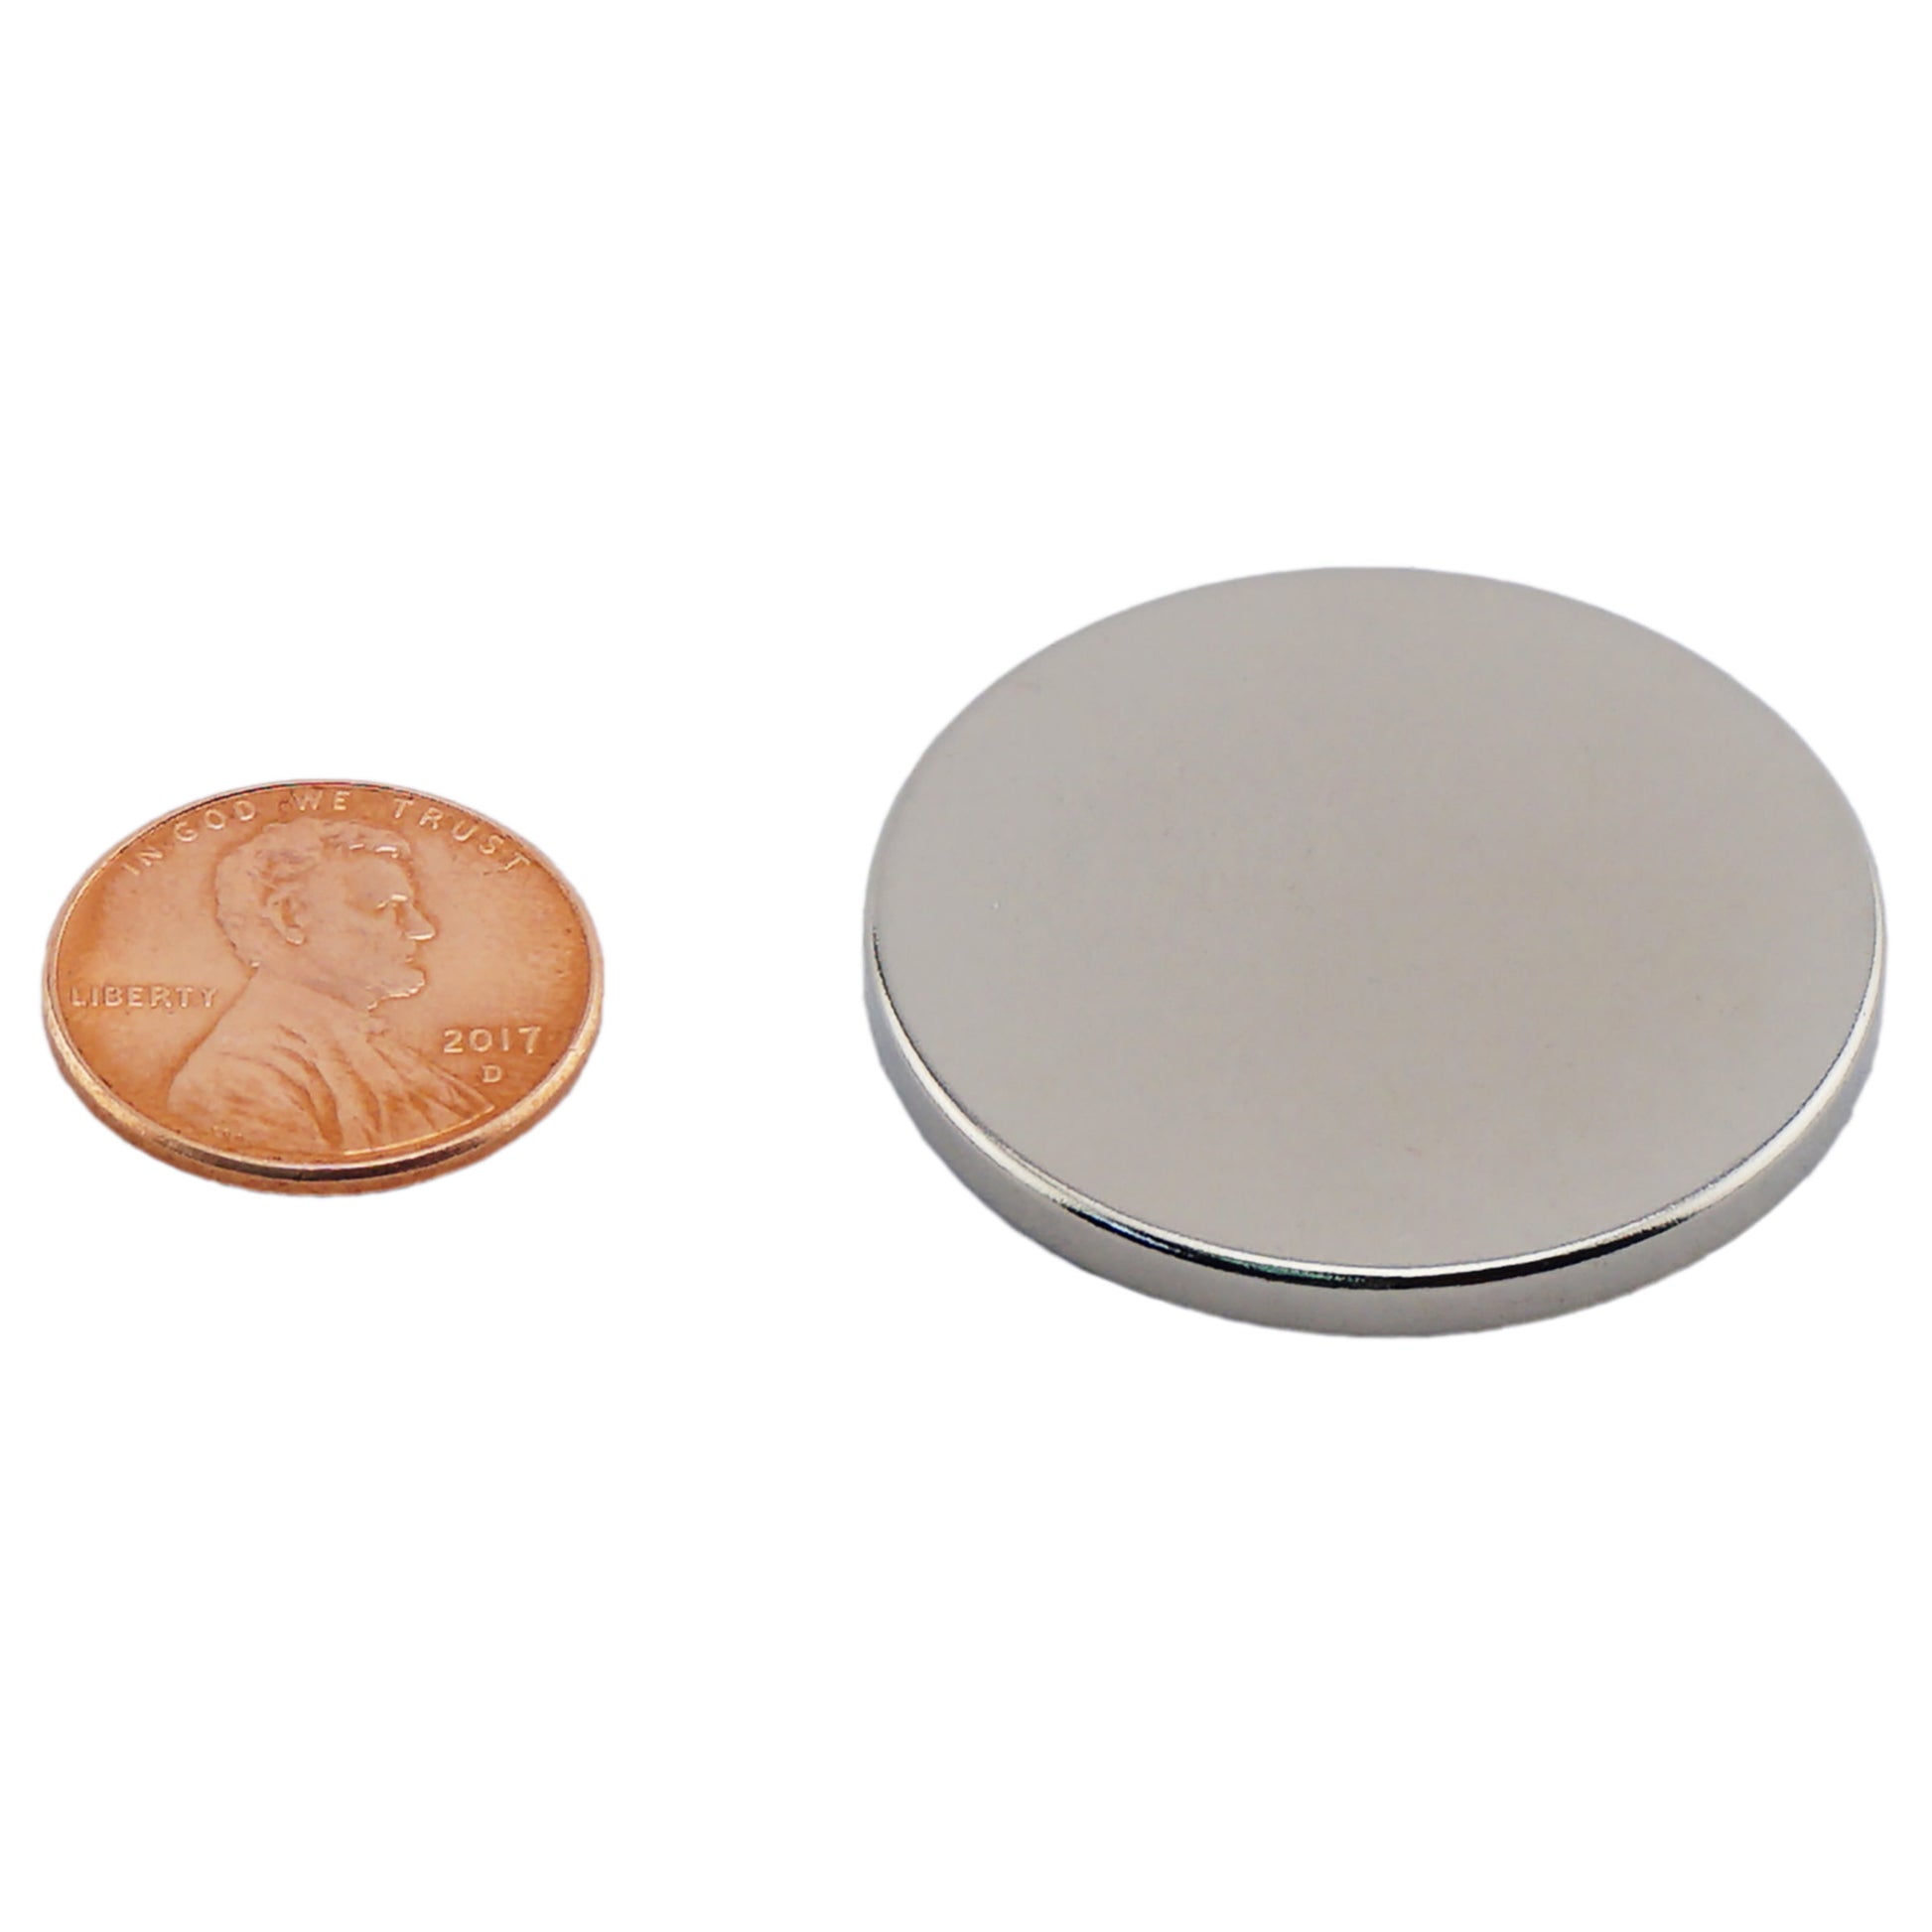 Load image into Gallery viewer, ND012505N Neodymium Disc Magnet - Compared to Penny for Size Reference